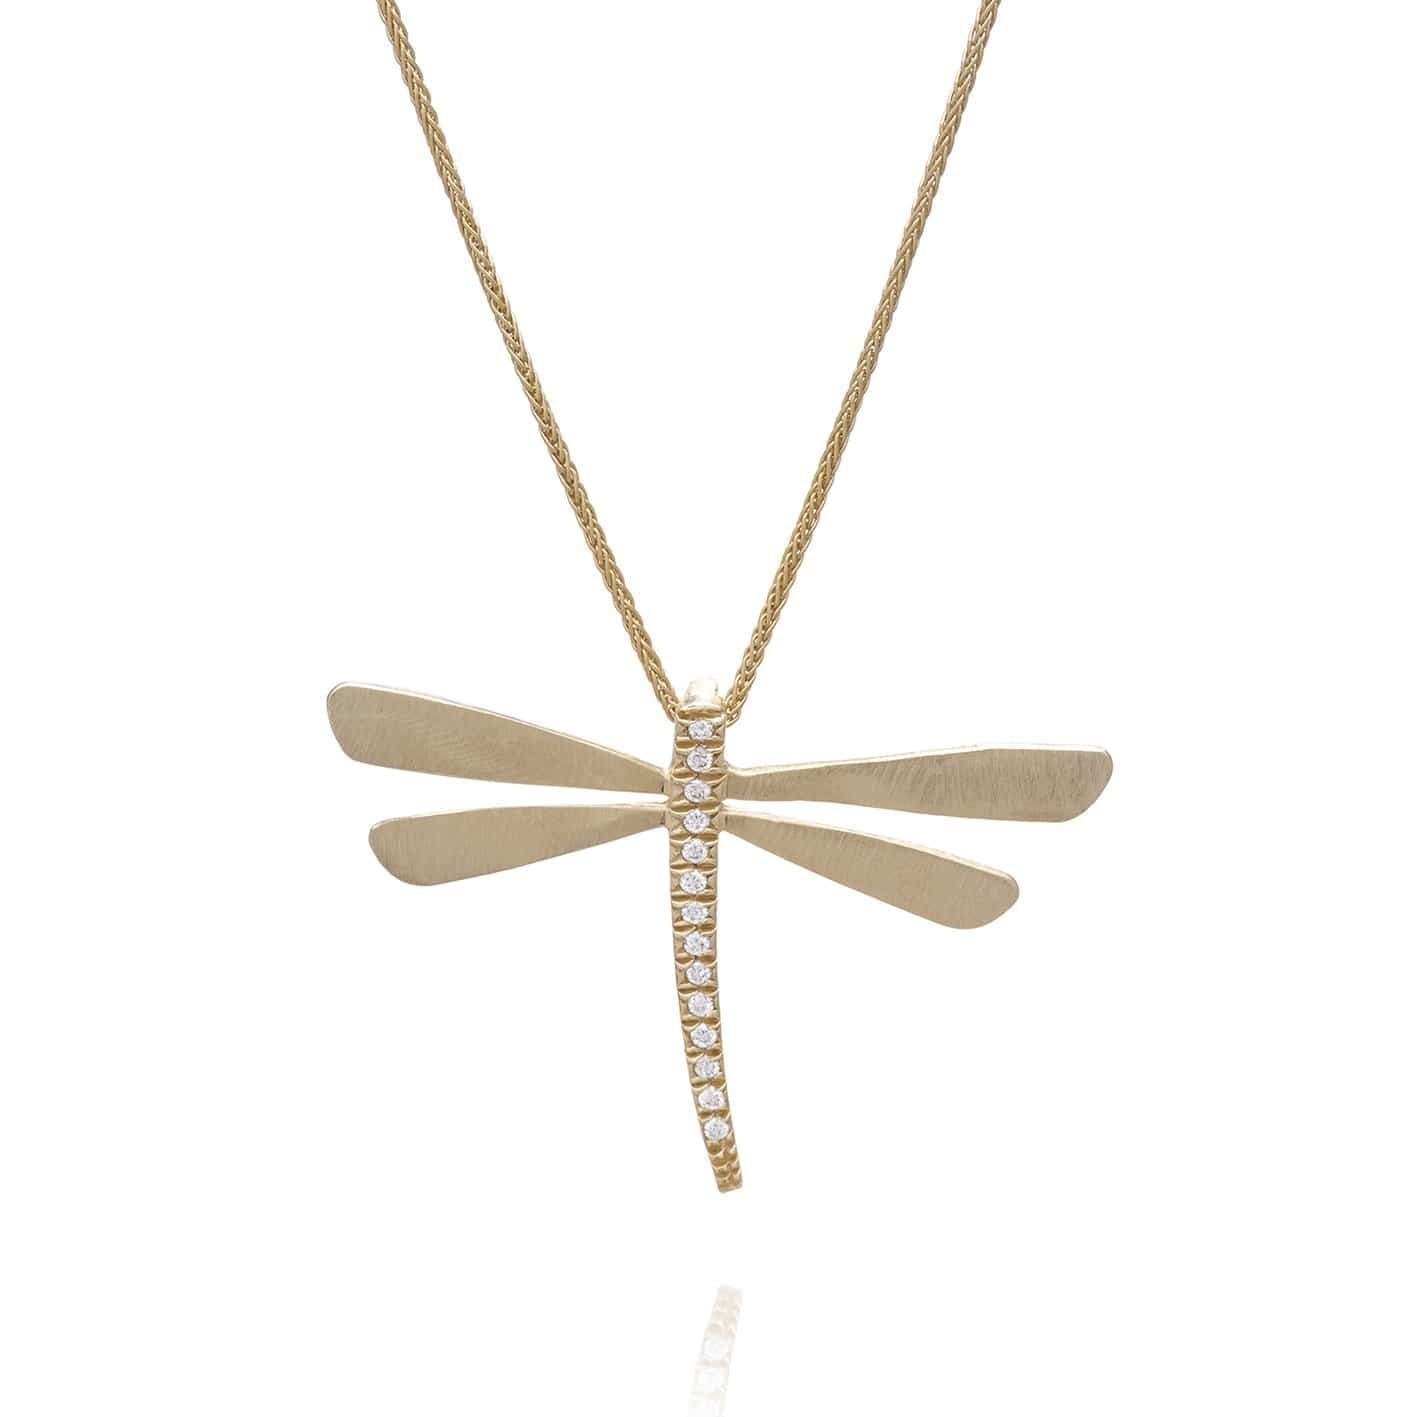 Dalia T Necklace Signature Collection 14KT YG Medium Dragonfly Pendant Necklace with Diamonds